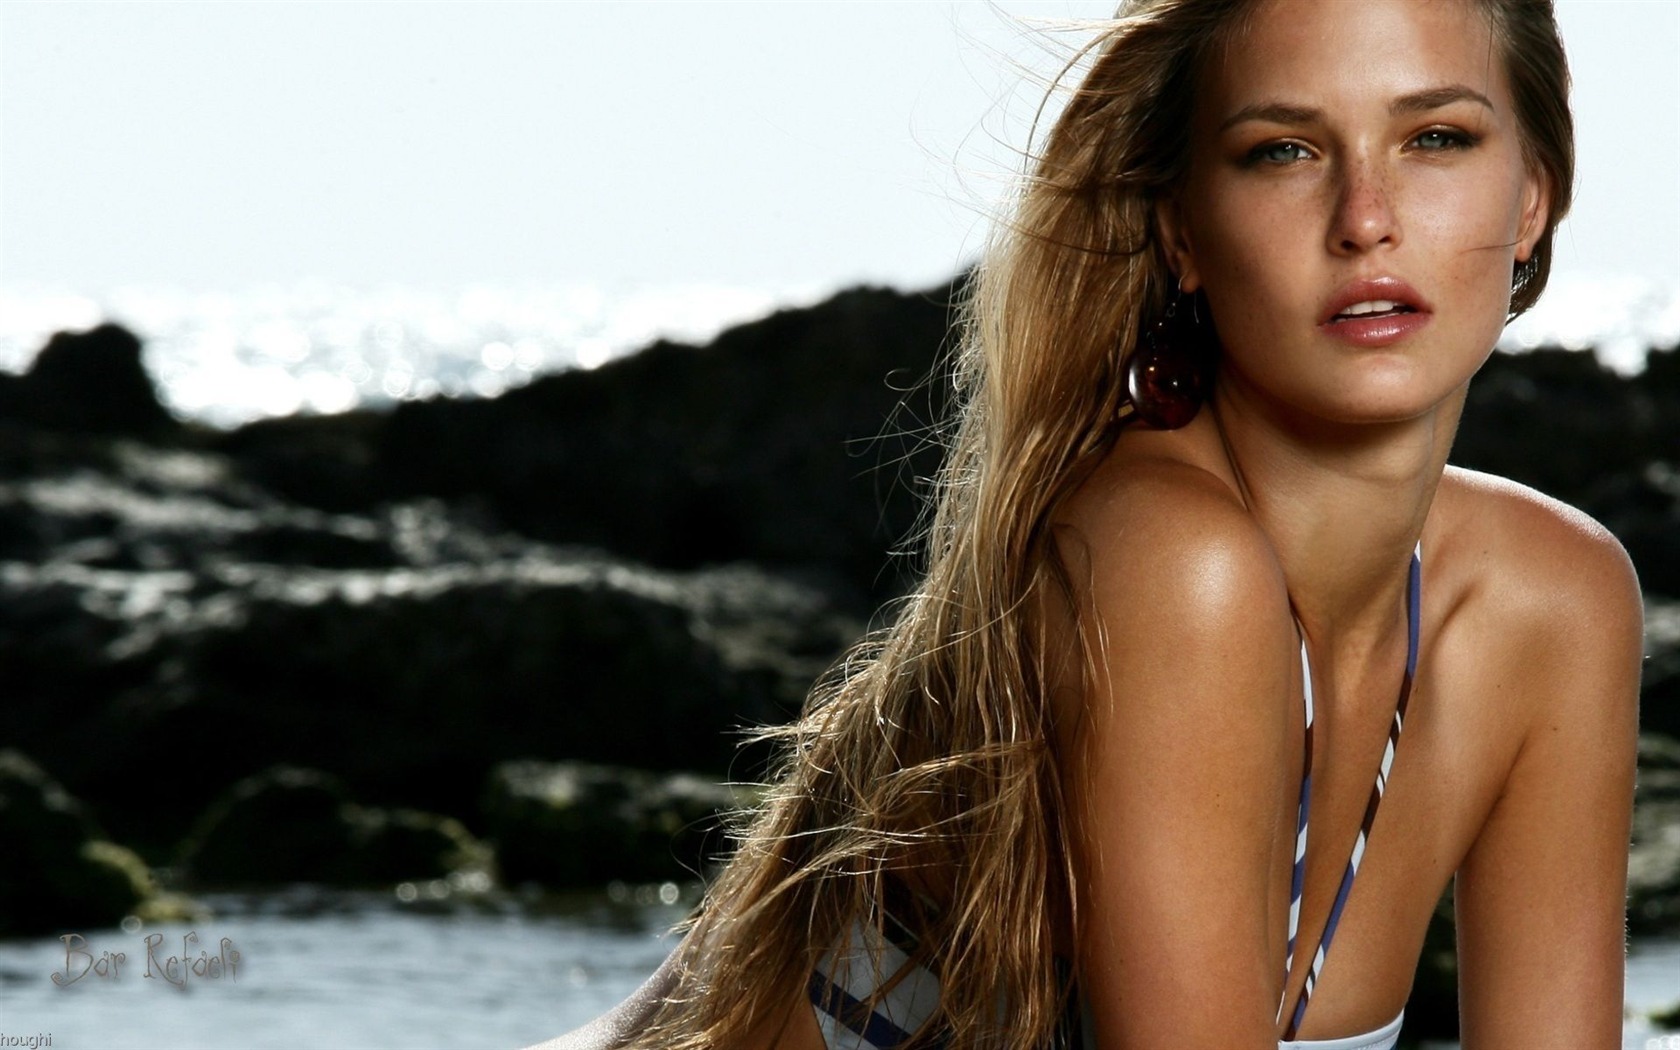 Bar Refaeli #009 - 1680x1050 Wallpapers Pictures Photos Images